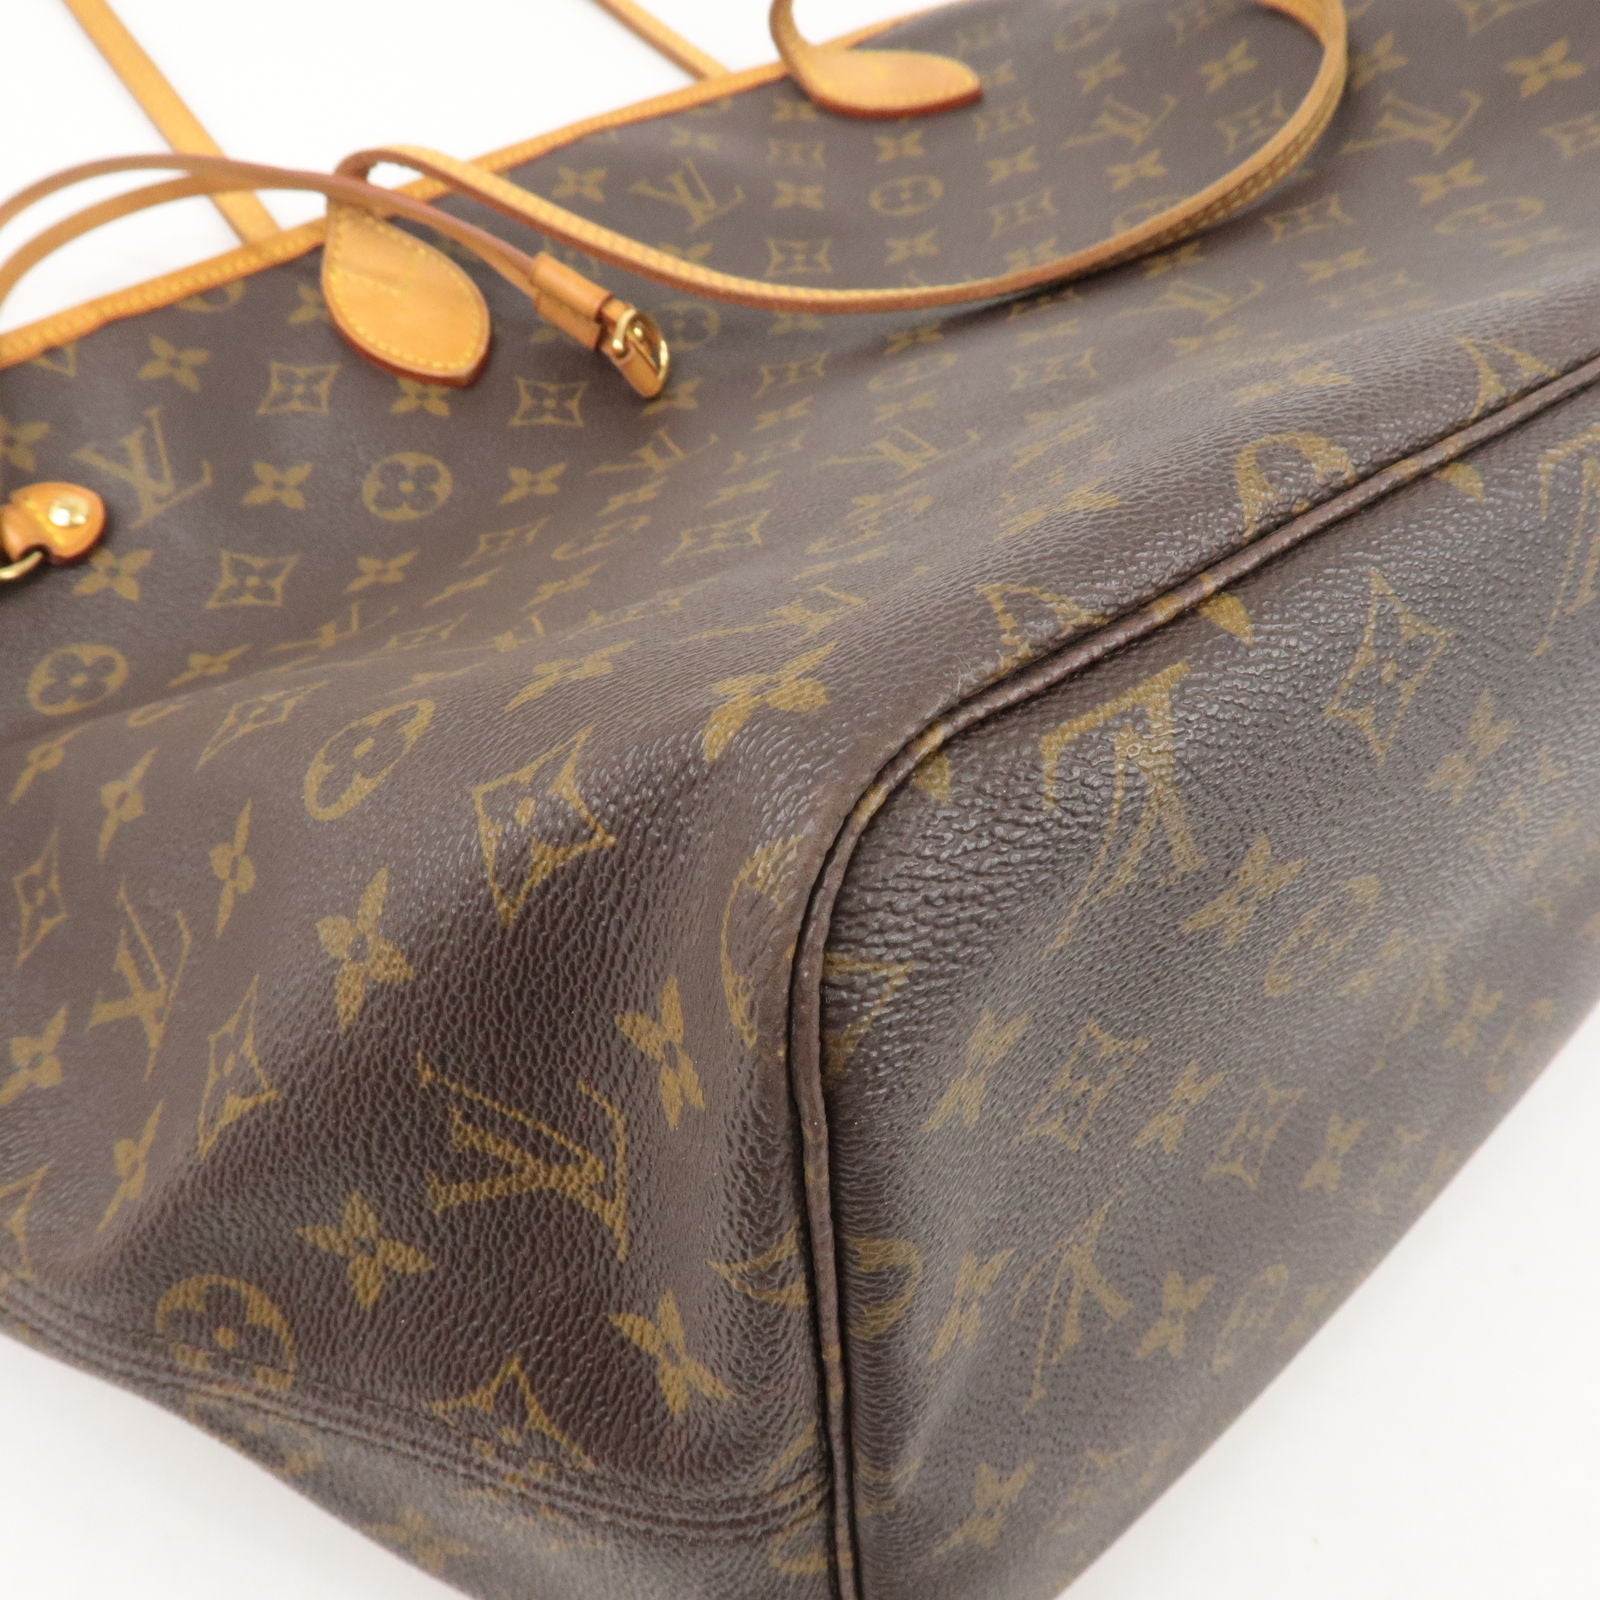 Authentic Louis Vuitton Monogram Neverfull GM Tote Bag Hand Bag M40157 Used  F/S